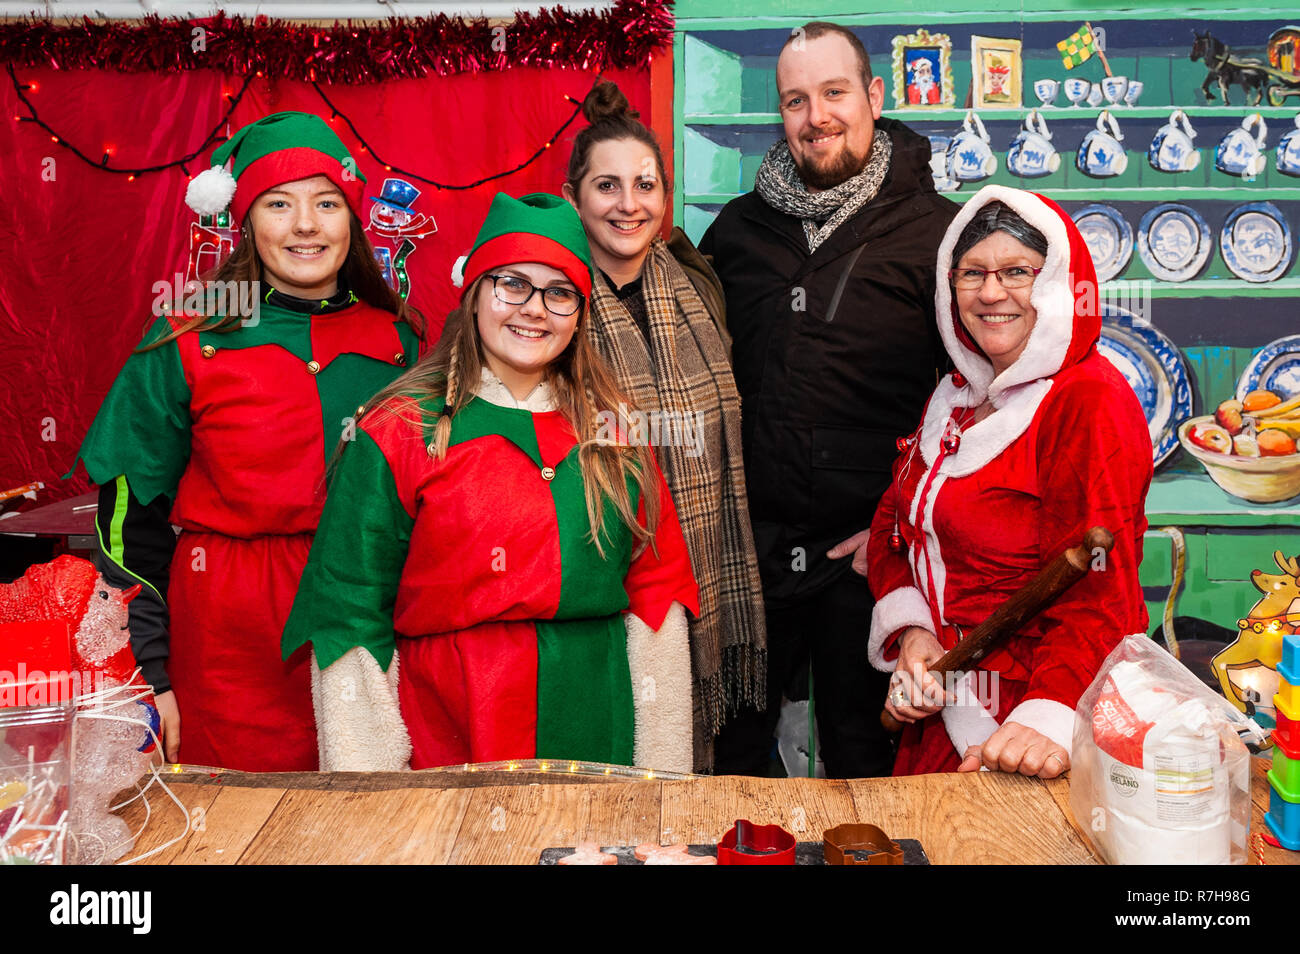 Leap, West Cork, Ireland. 9th Dec, 2018. Santa is appearing at Leap Land up until Christmas.  Leap Land is an annual event facilitated by Ger of the world-famous Ger's Wild Atlantic Diner in Leap.  Helping Mrs Claus with her baking this evening were elves Laura Roycroft and Maebh Barry with Mairead Finn and Michael Collins, both from Cork. Credit: AG News/Alamy Live News. Stock Photo